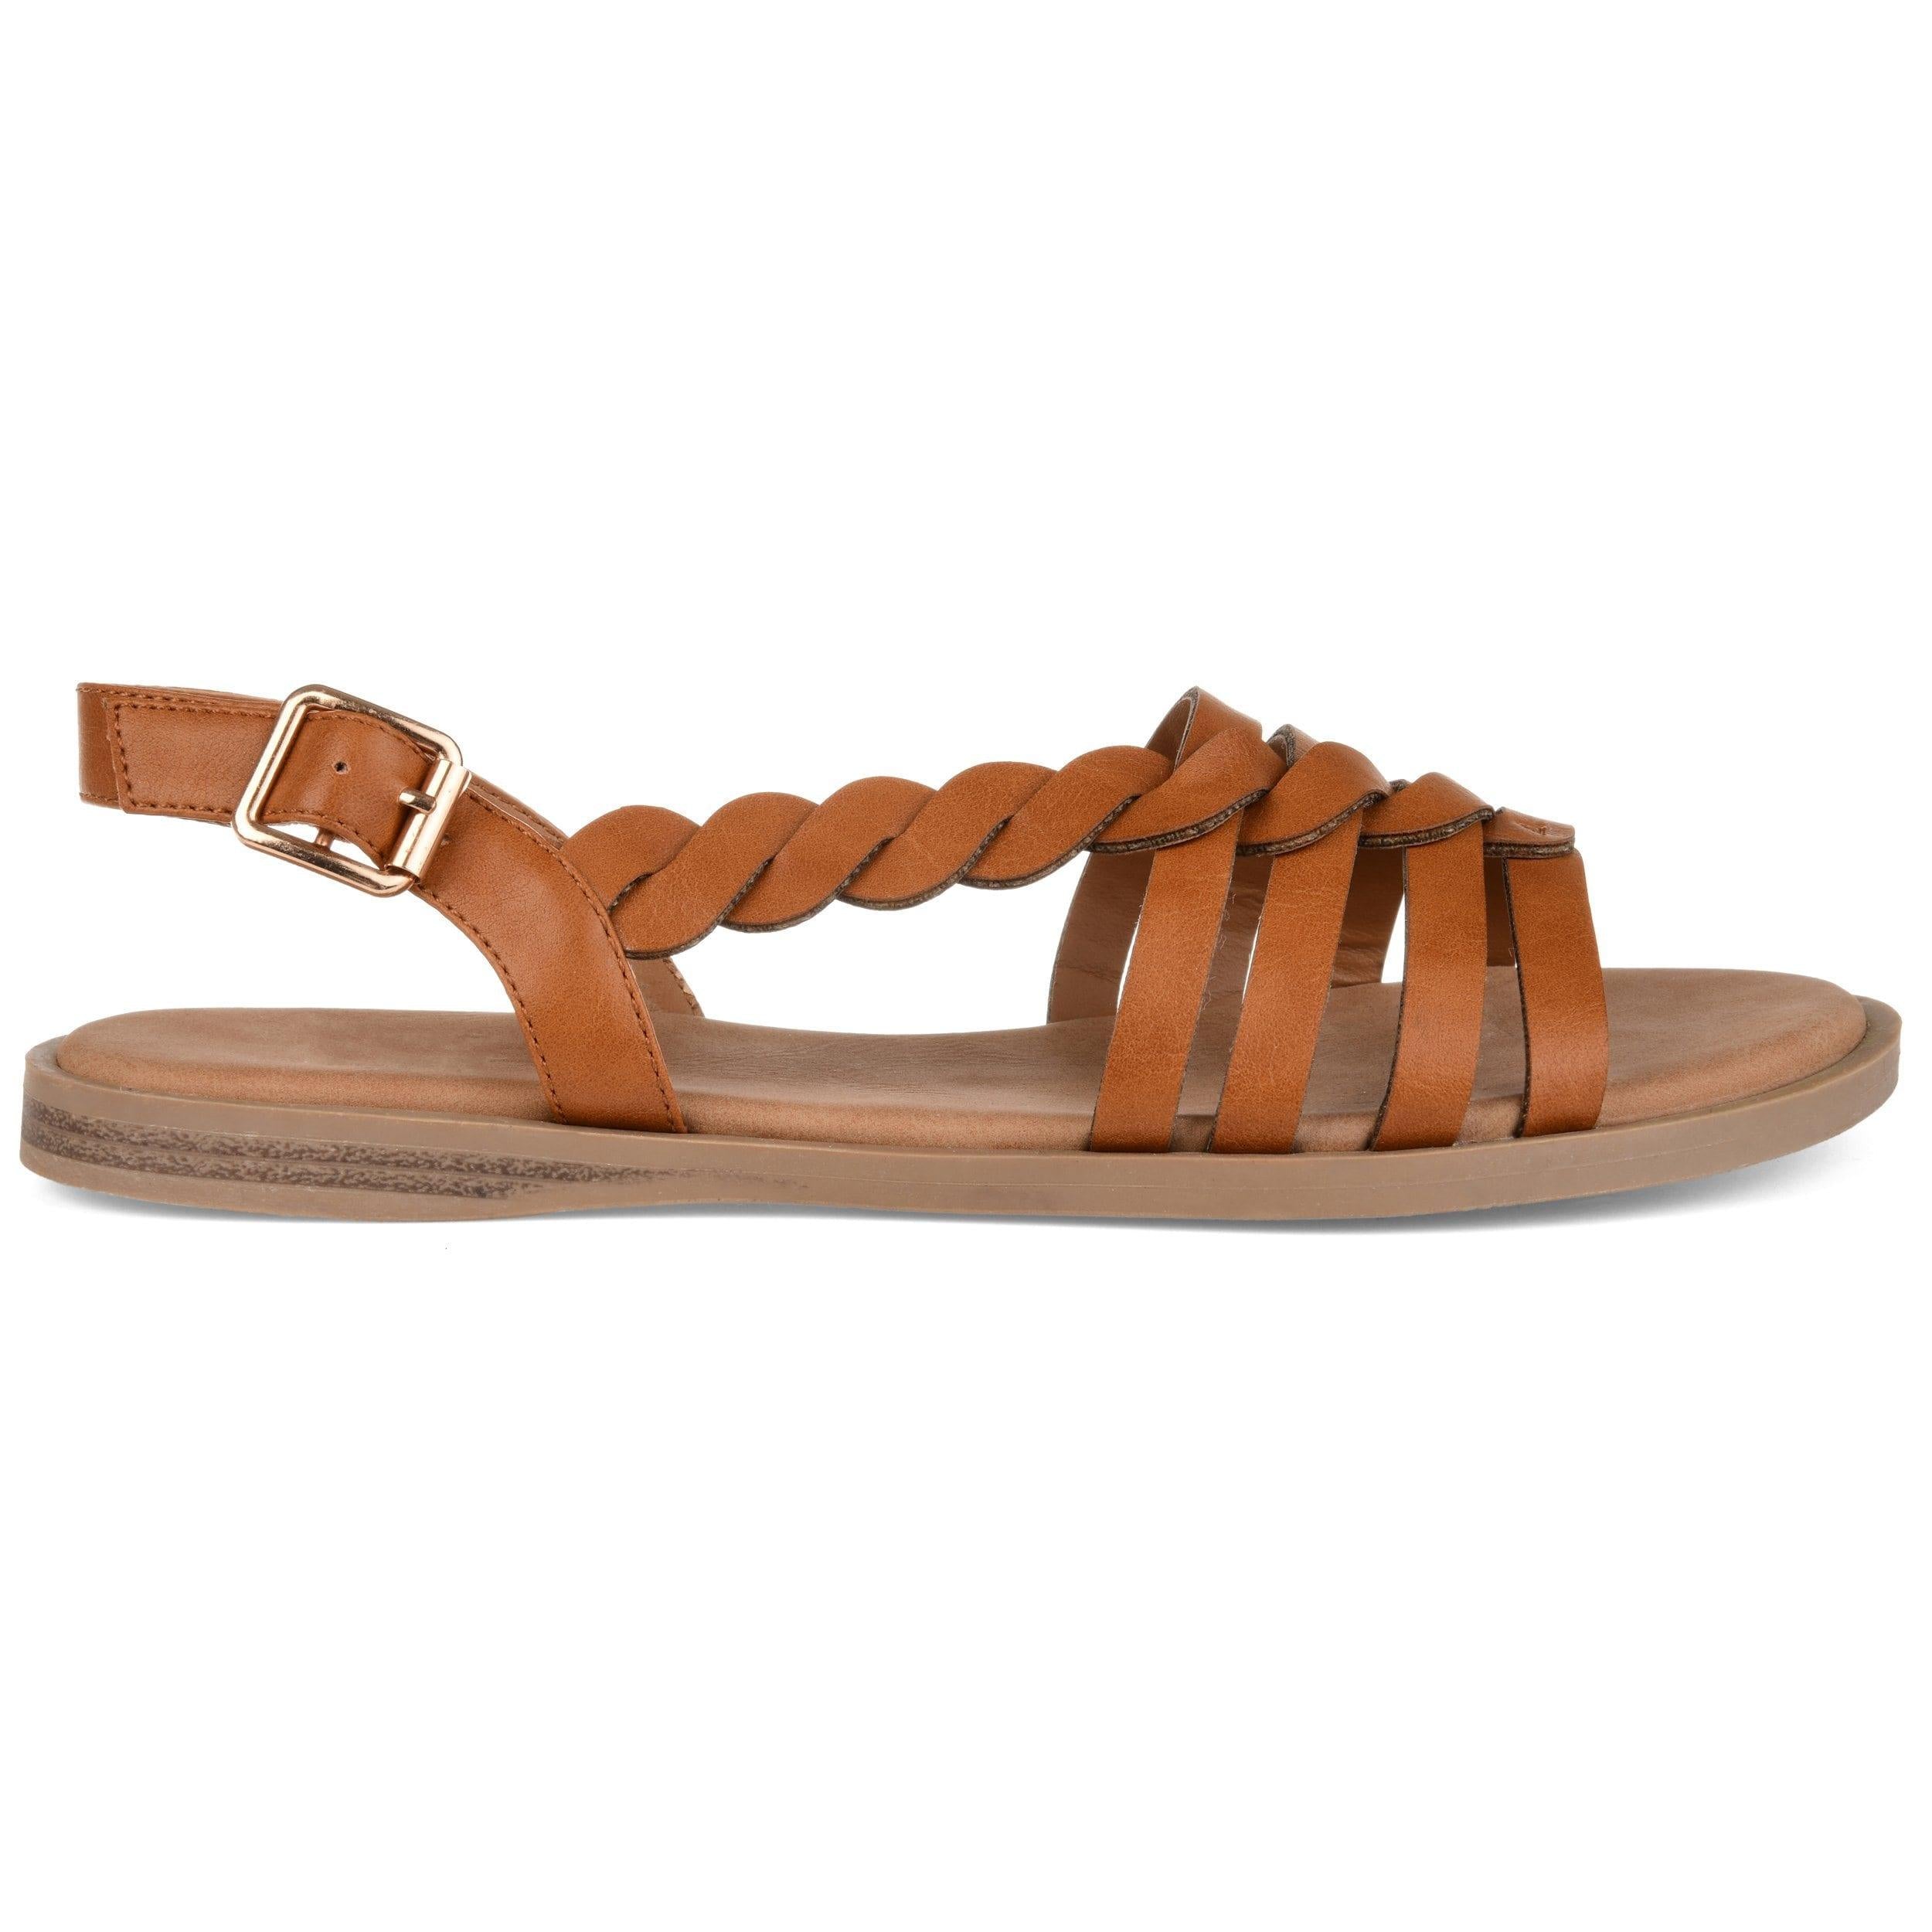 8 By YOOX WOVEN LEATHER SQUARE TOE FLAT SANDAL | Dark brown Women's Sandals  | YOOX